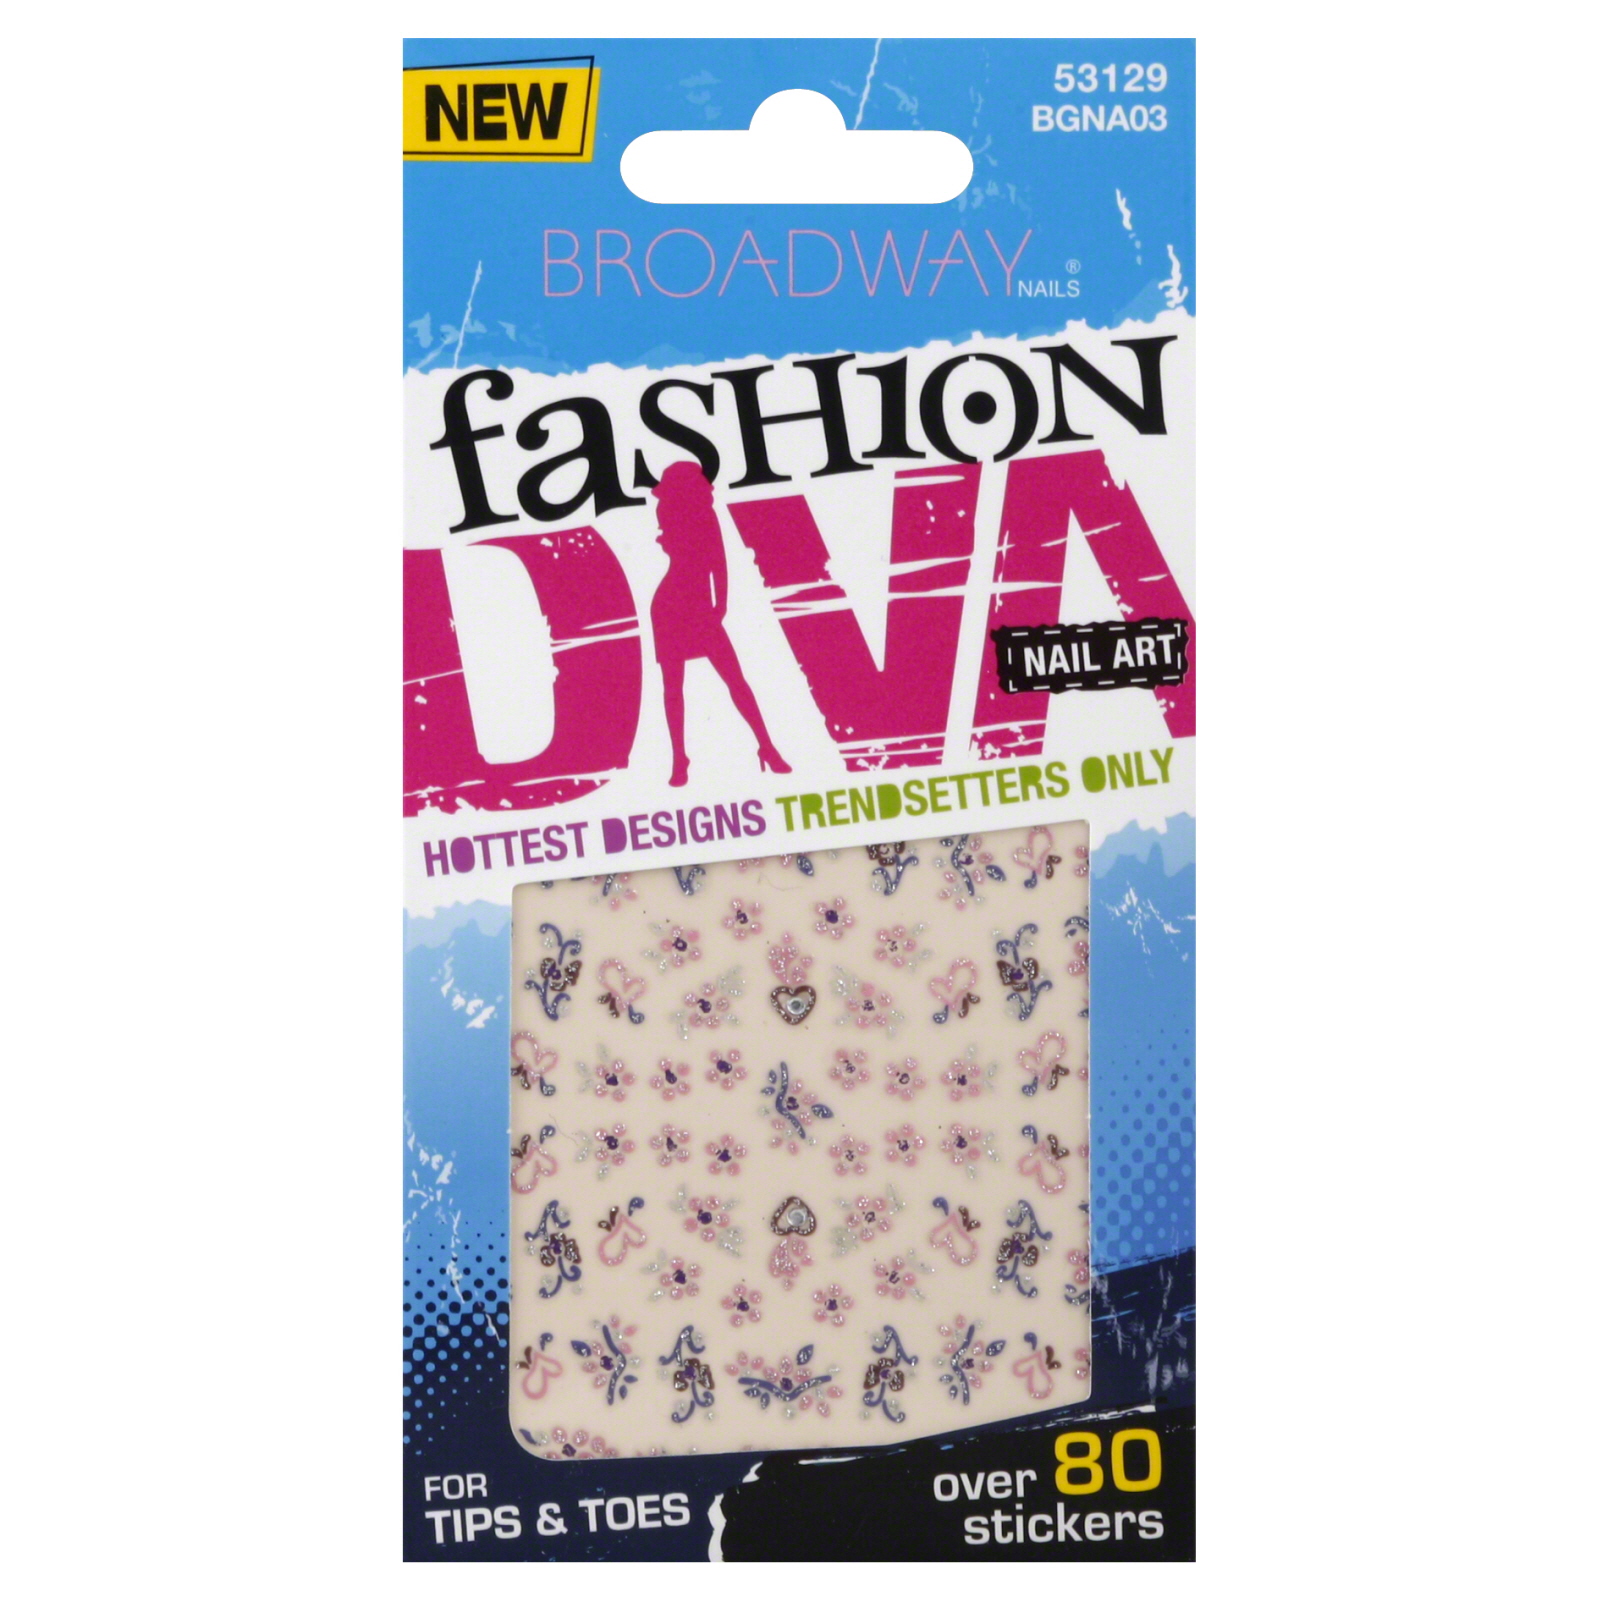 Broadway Nails Fashion Diva Nail Art, for Tips & Toes, Keep Me, 1 package